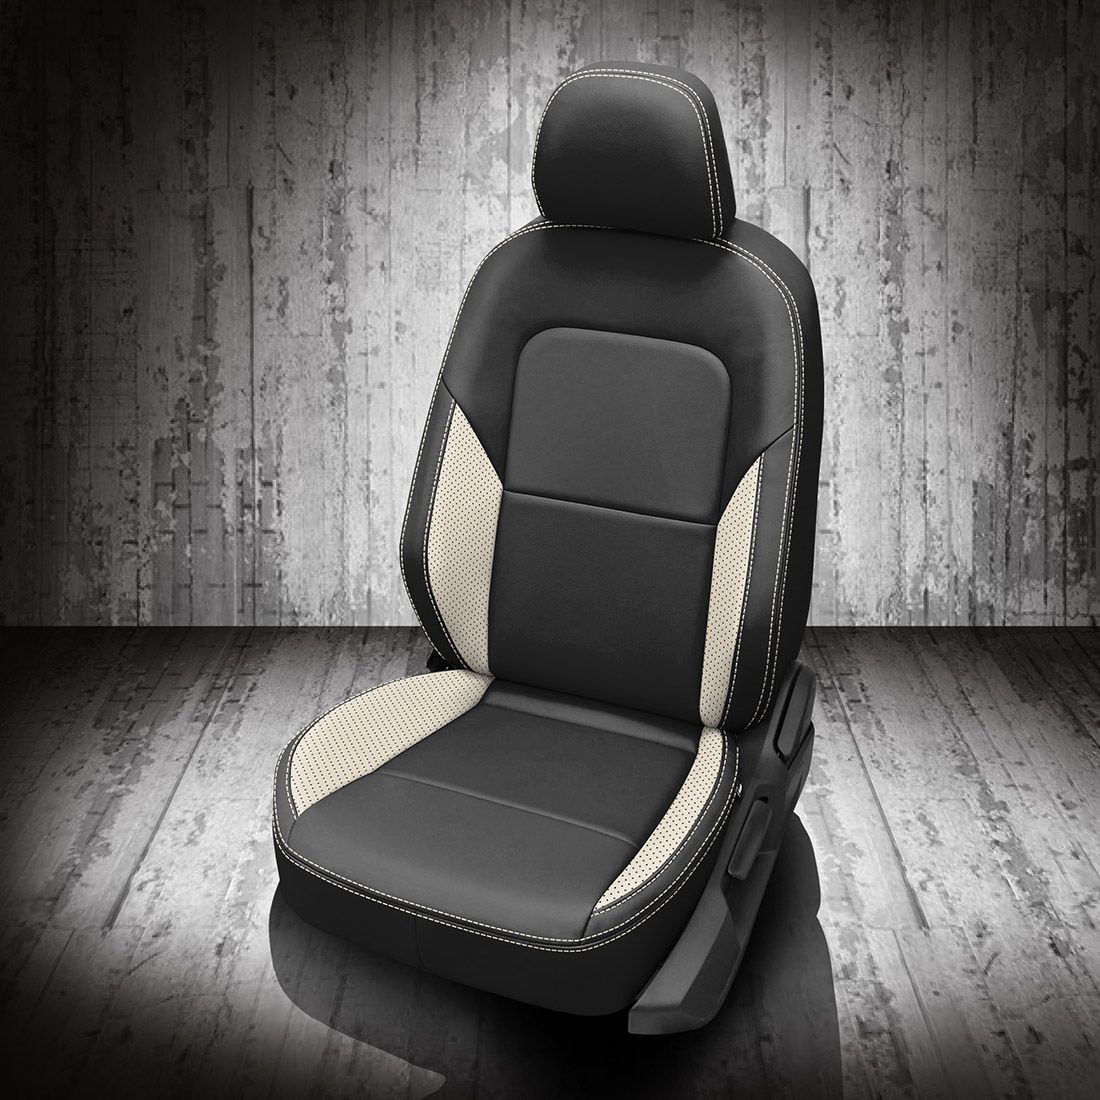 Fit: Volkswagen Jetta front Seats Only Made by Designcovers in